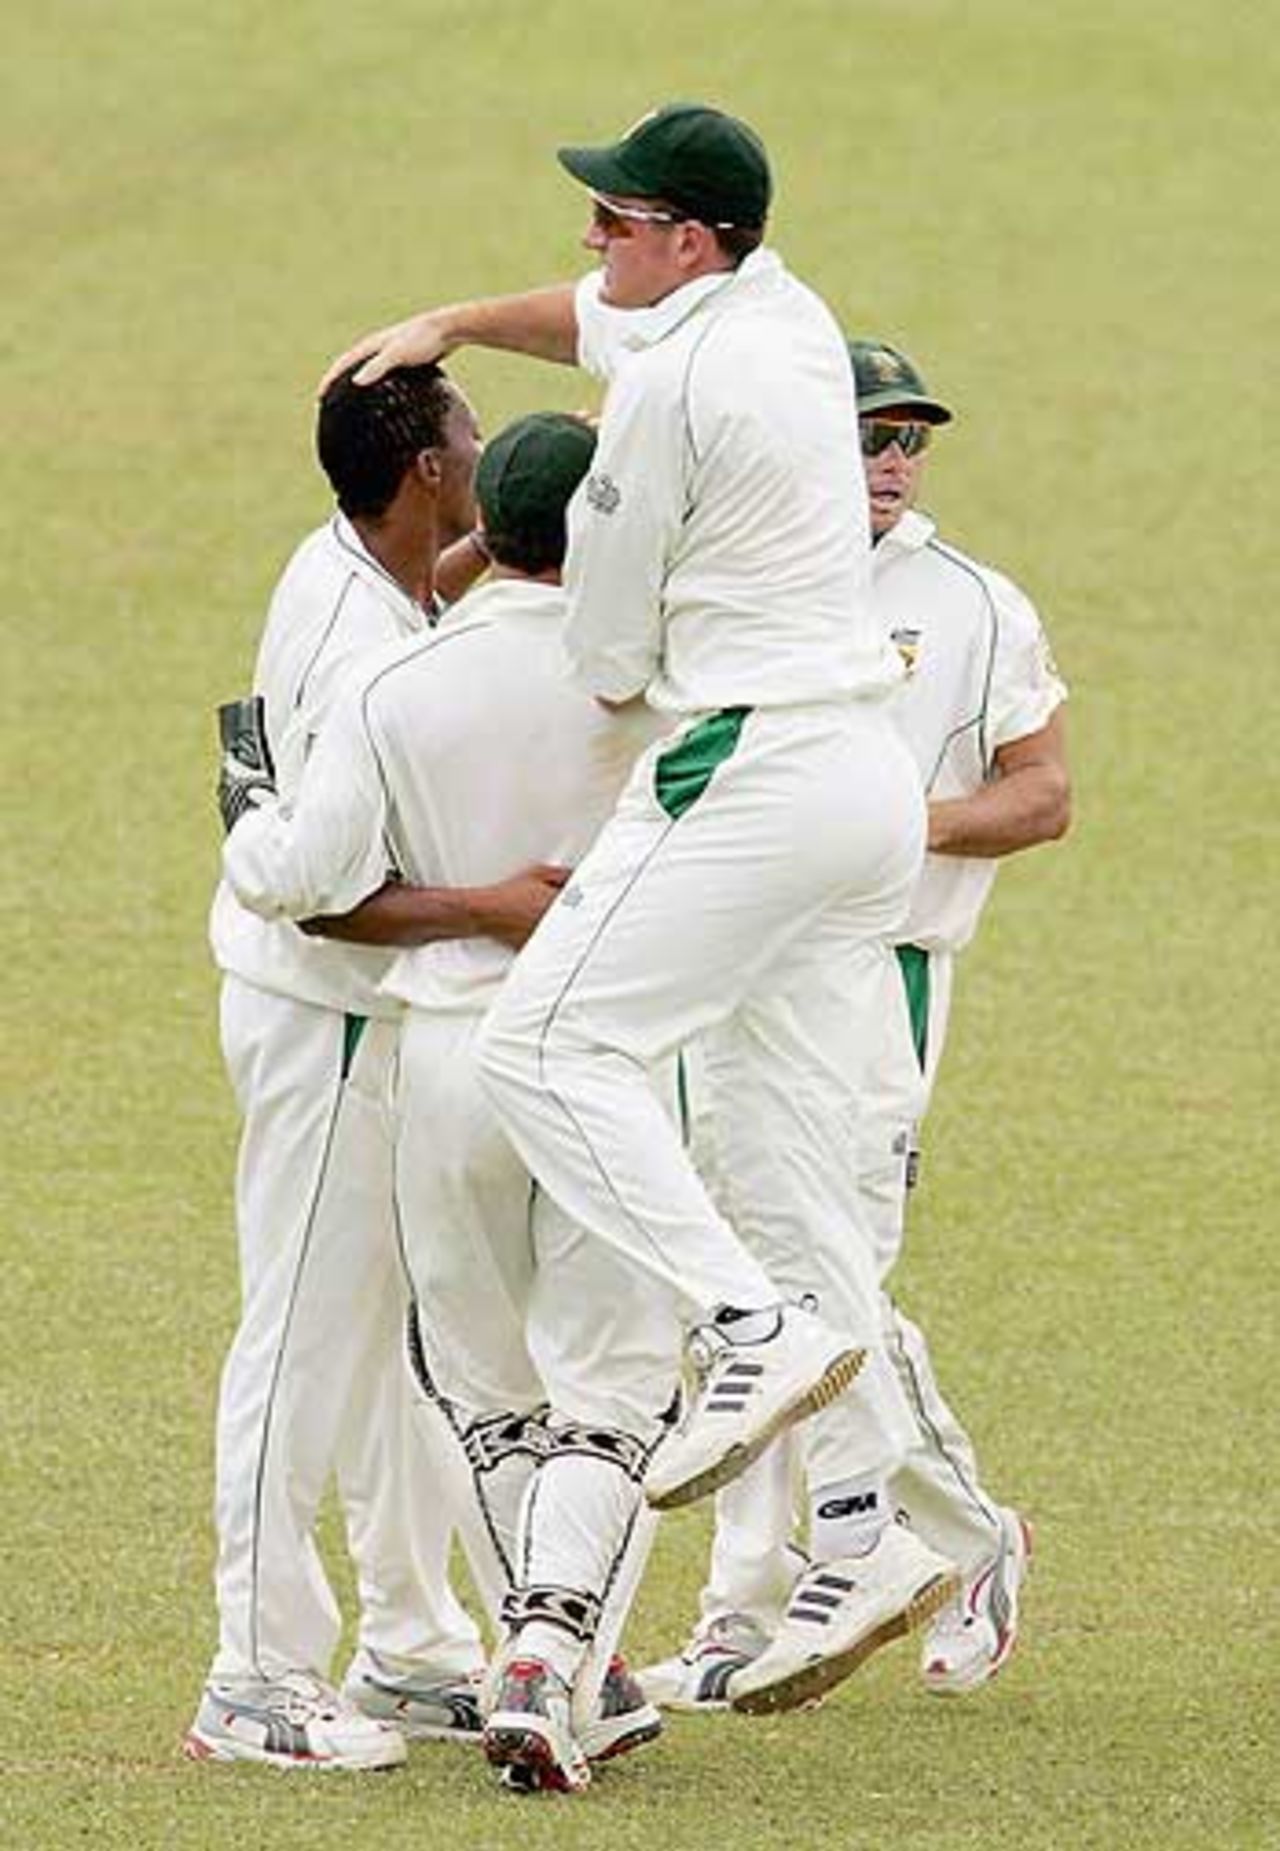 South Africa celebrate the dismissal of Chris Gayle, as West Indies stumble against South Africa at Trinidad, April 11, 2005